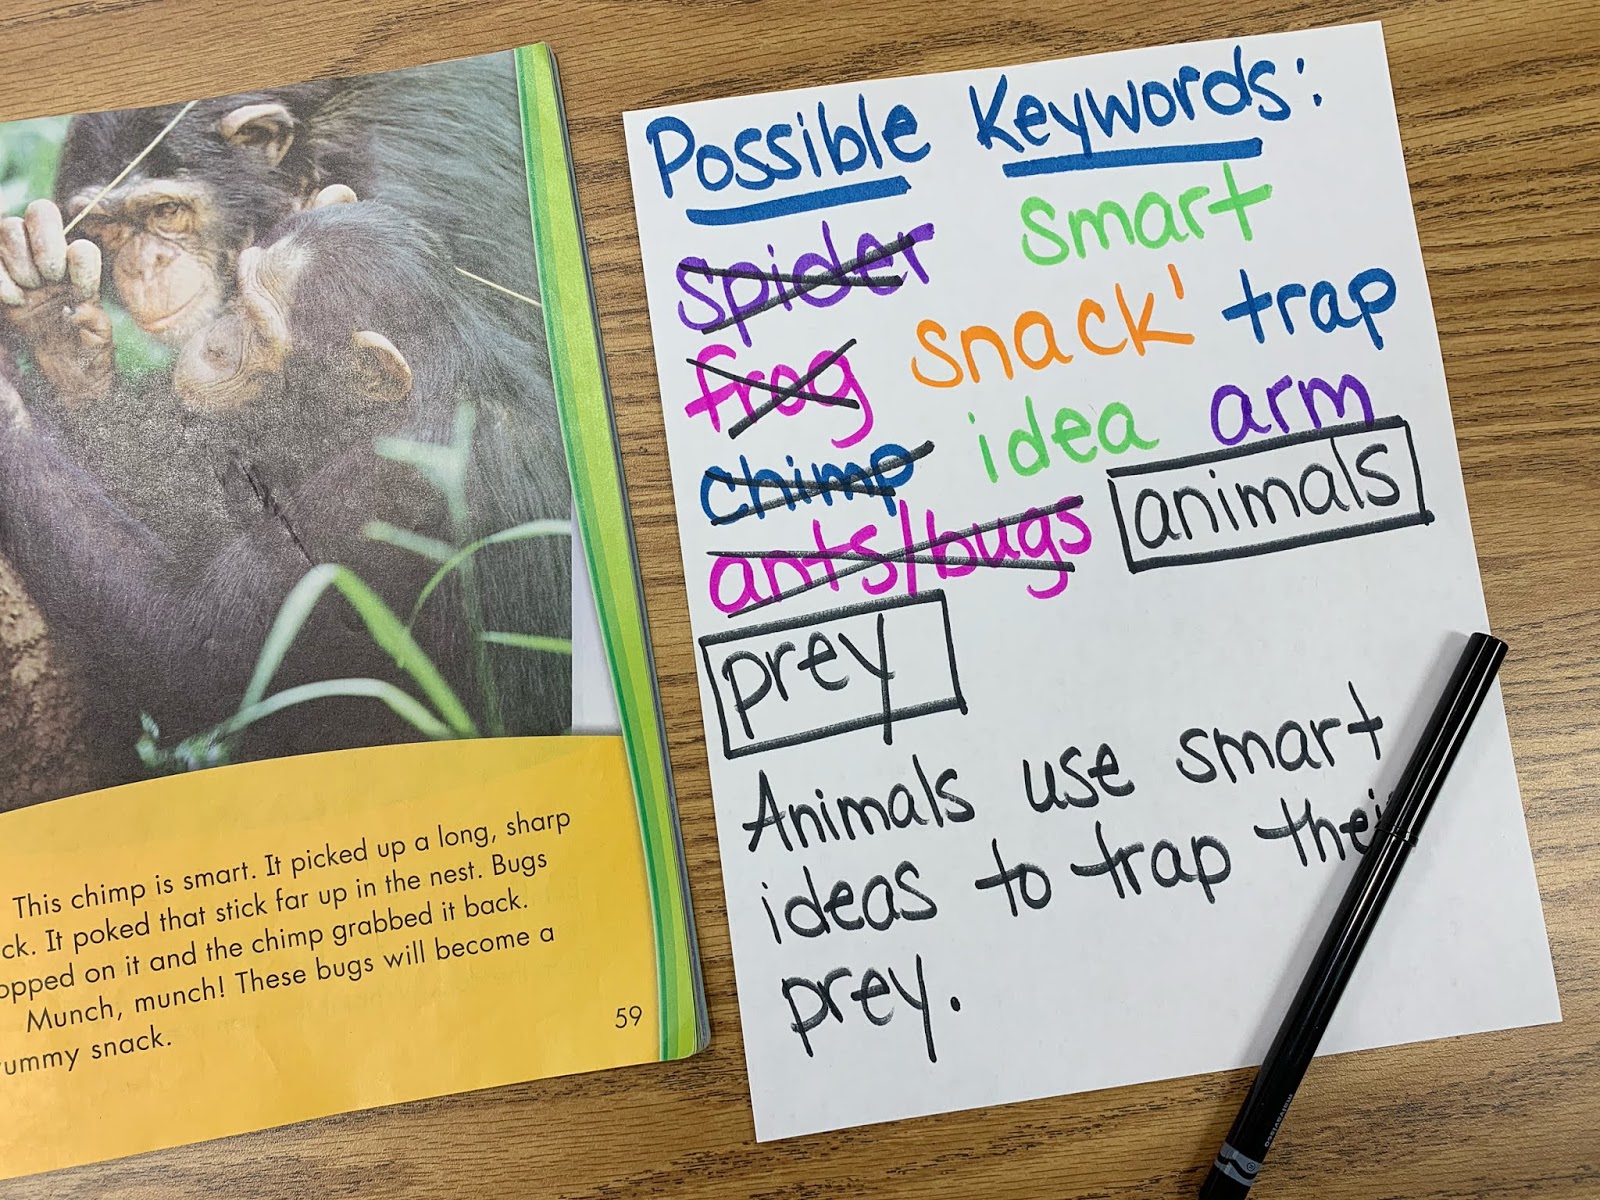 Text showing a picture of chimps and possible keywords paper with main idea sentence added